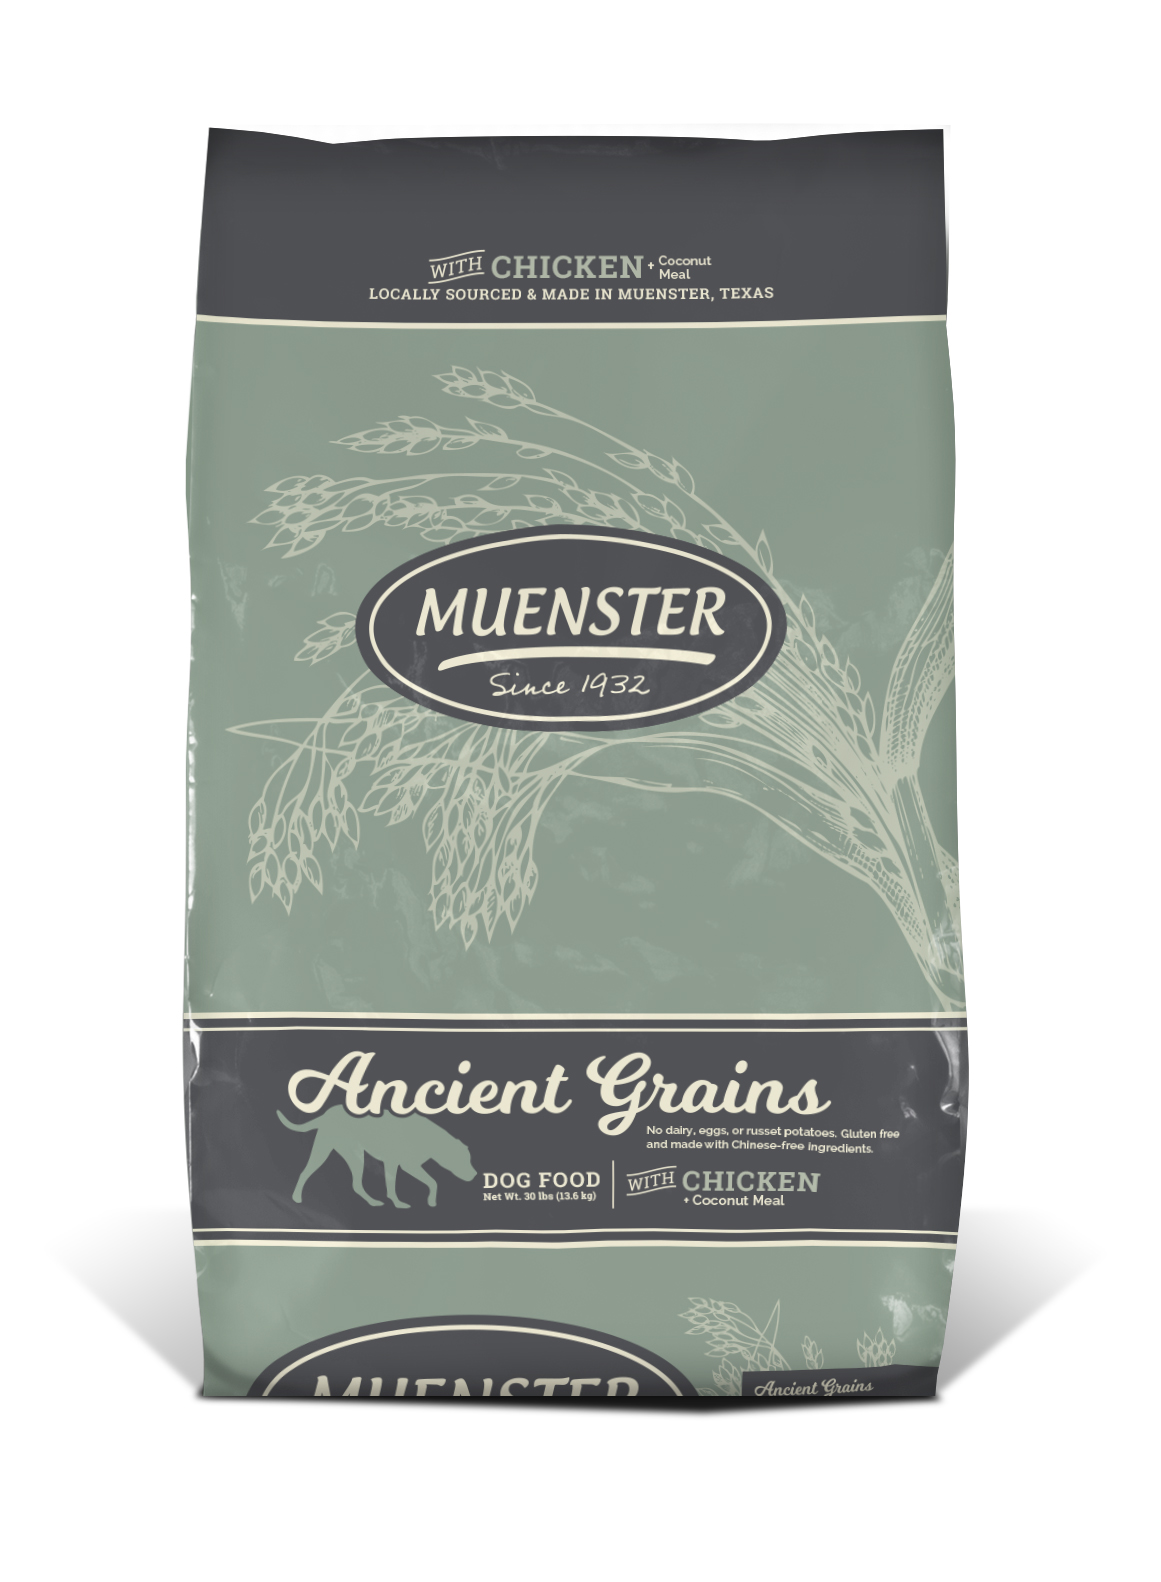 Muenster Ancient Grains with Chicken Dog Food, 22 lbs